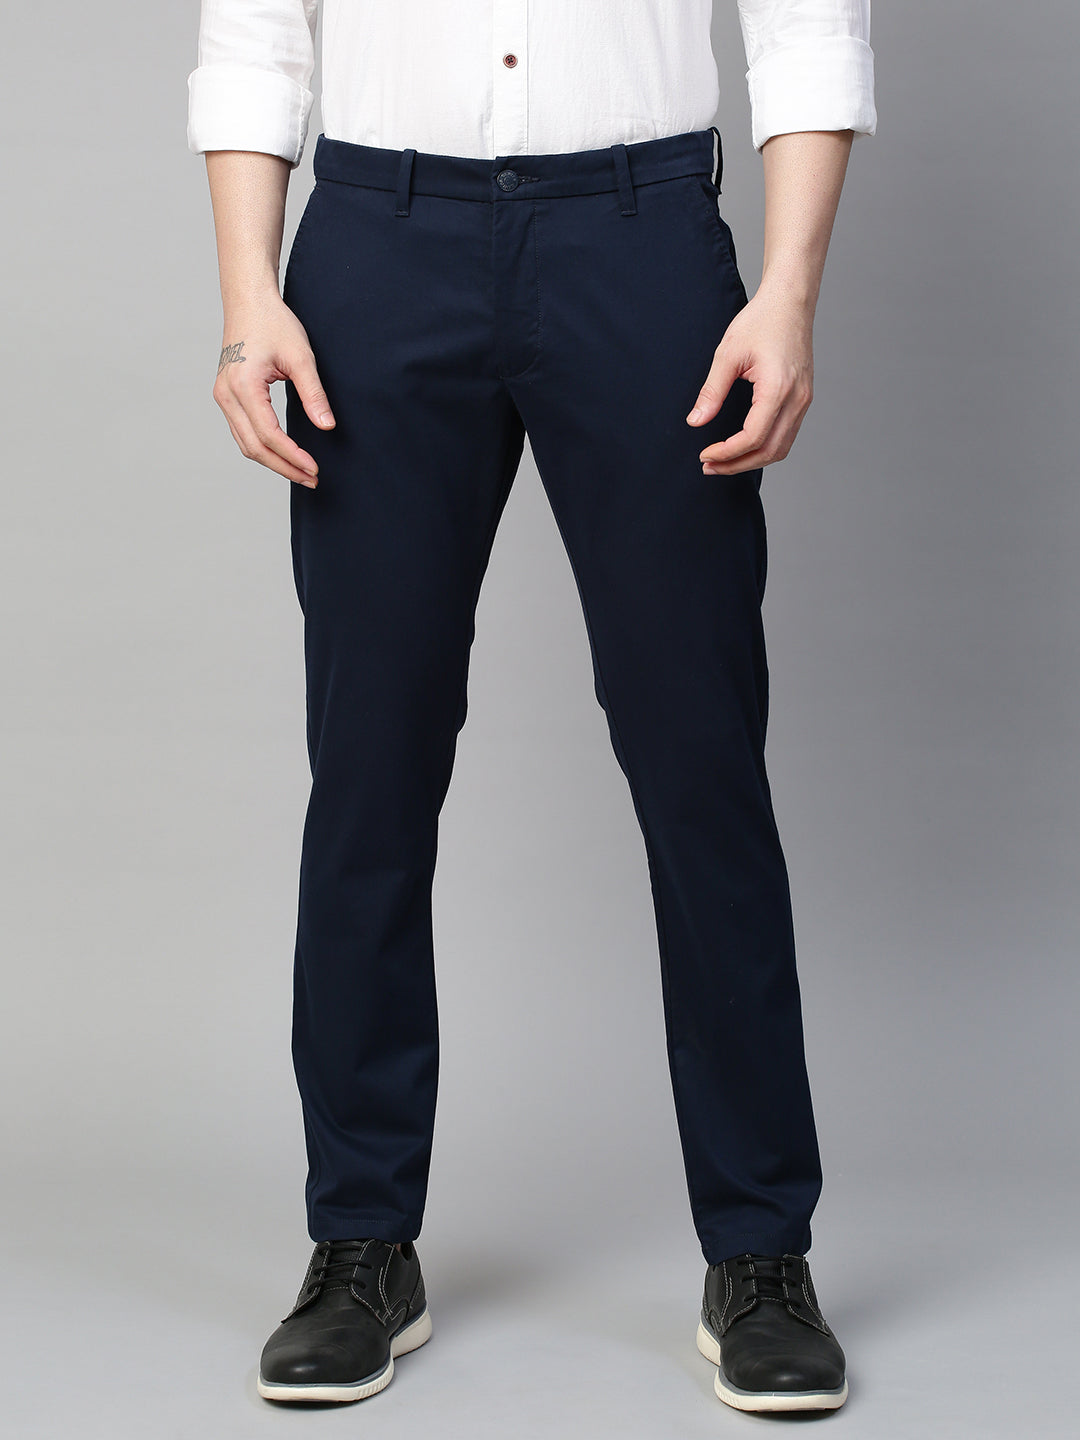 Genips Men's Navy Cotton Stretch Caribbean Slim Fit Solid Trousers